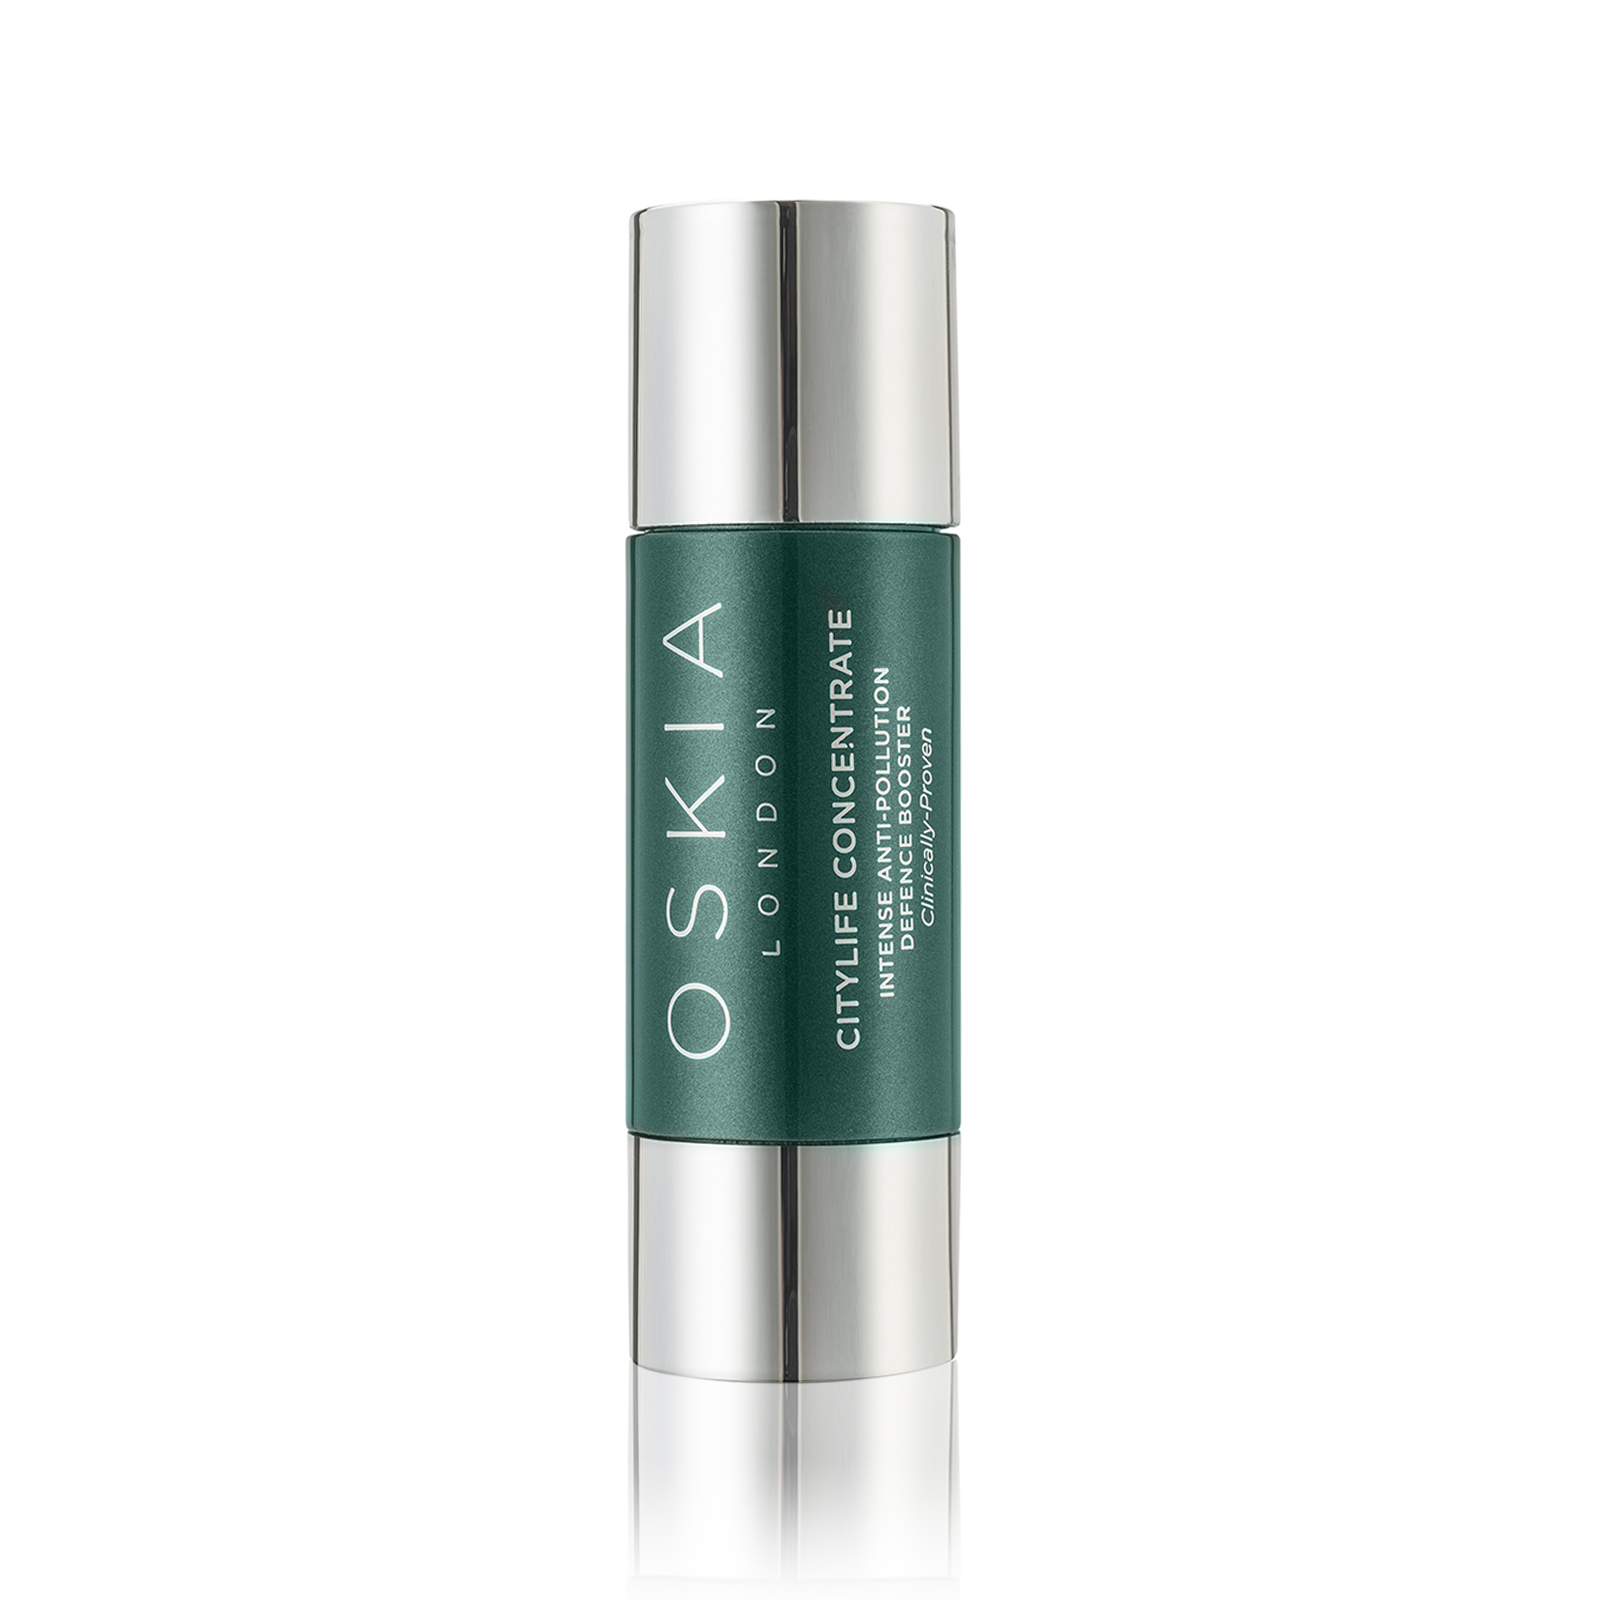 Oskia Citylife Concentrate Intense Anti-Pollution Defence Booster